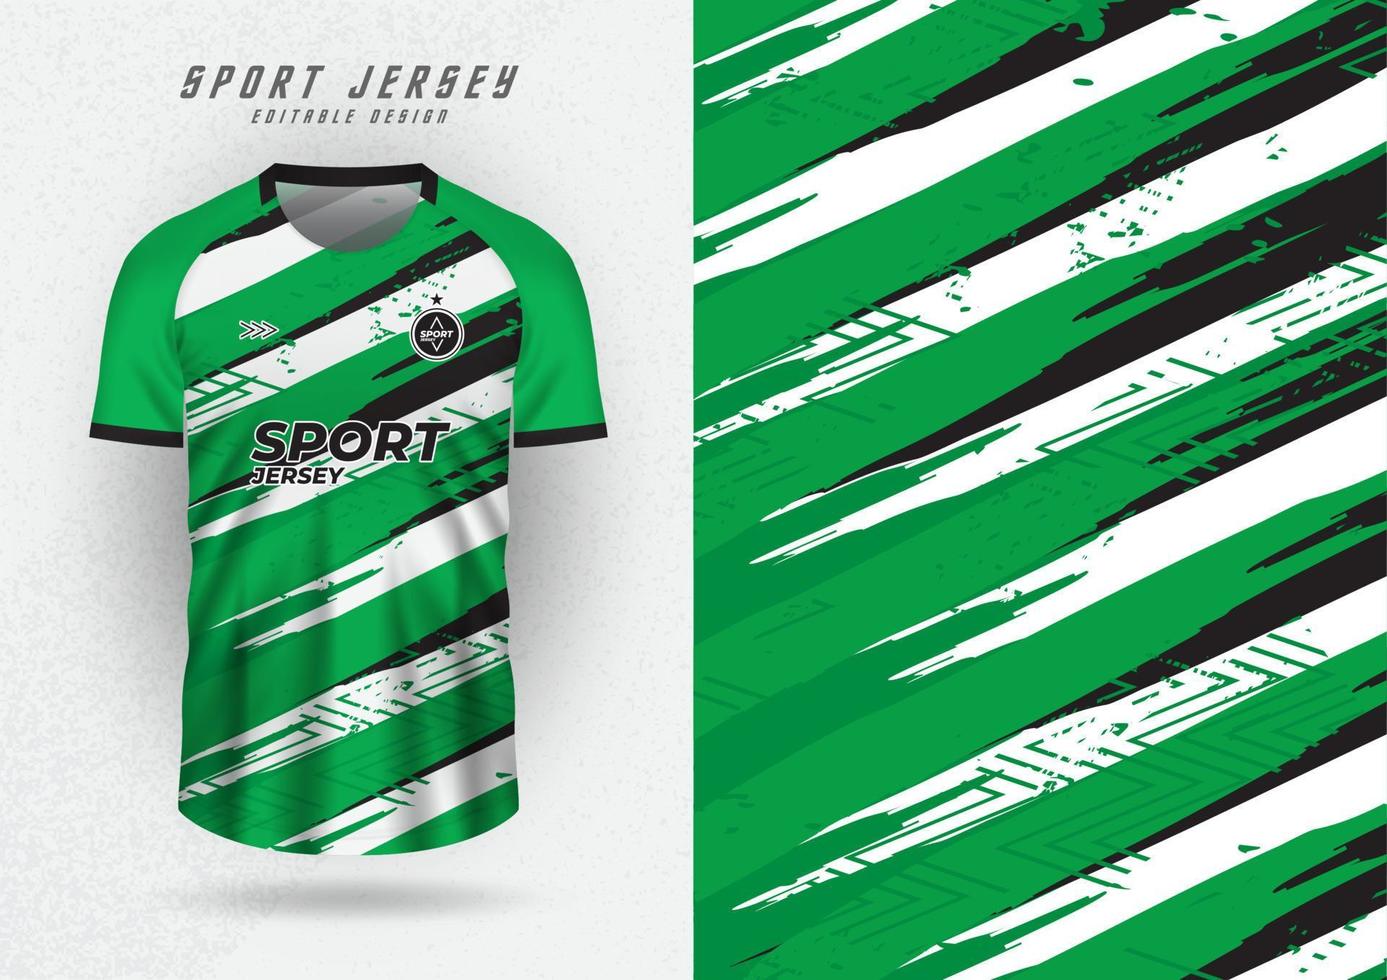 Background for sports jersey, football shirt, running shirt, racing shirt, green tone pattern and black and white stripes. vector